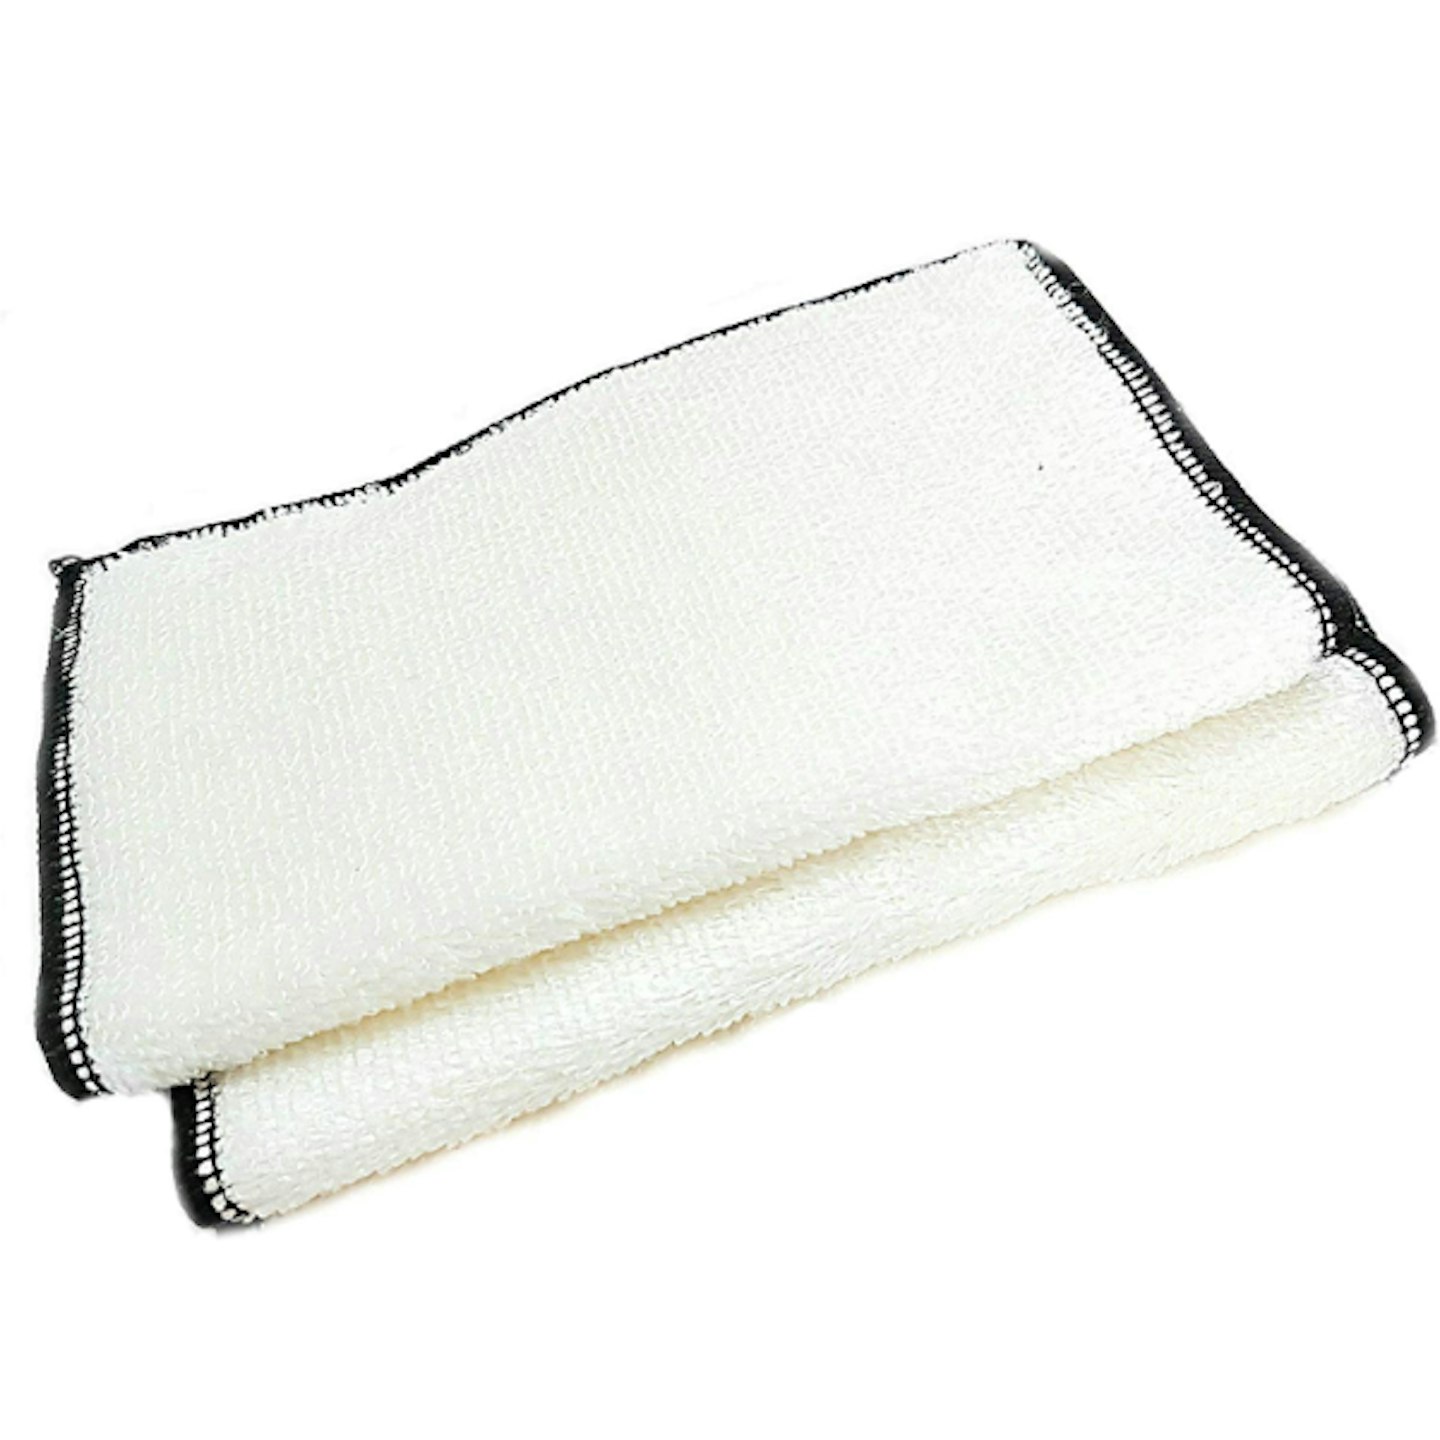 BfefBo Bamboo Fibre Cleaning Cloths 2 Pack